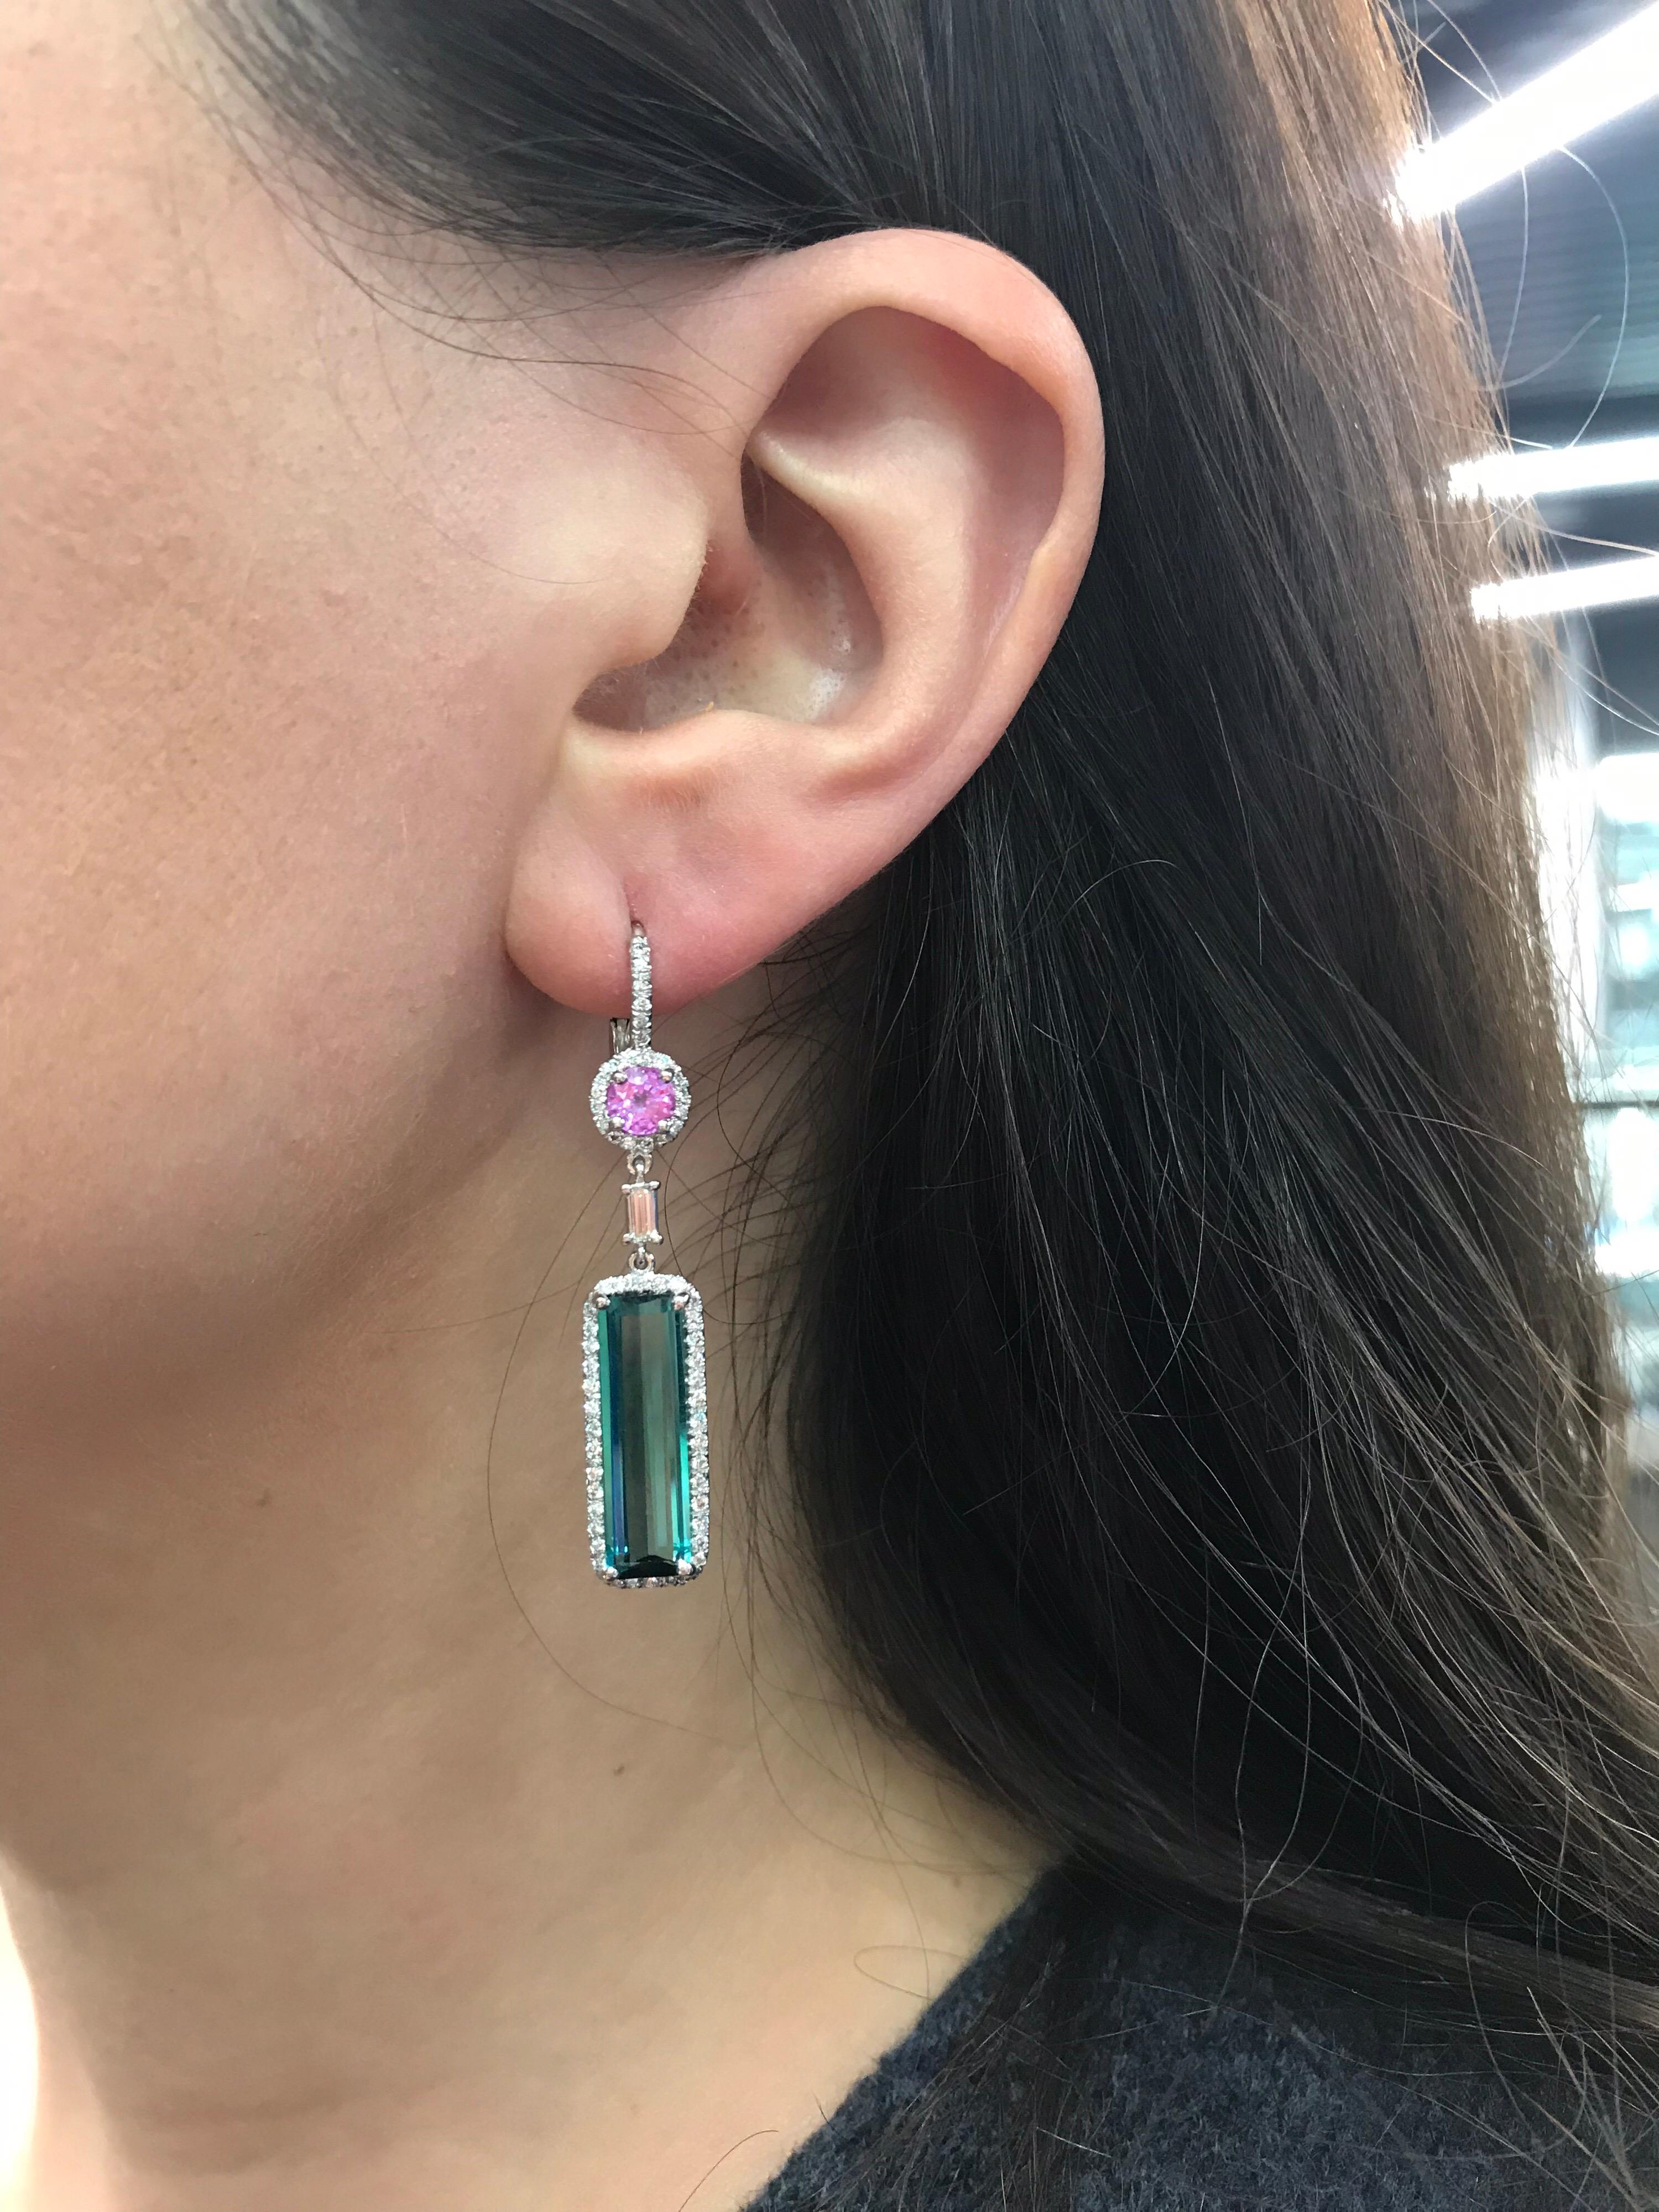 14K White gold drop earrings featuring two blue-greenish Indicolite tourmalnes weighing 8 carats, with 2 pink sapphires weighing 1.00 carat flanked with round brilliants weighing 1.10 carats.

Color G
Clarity VS-SI